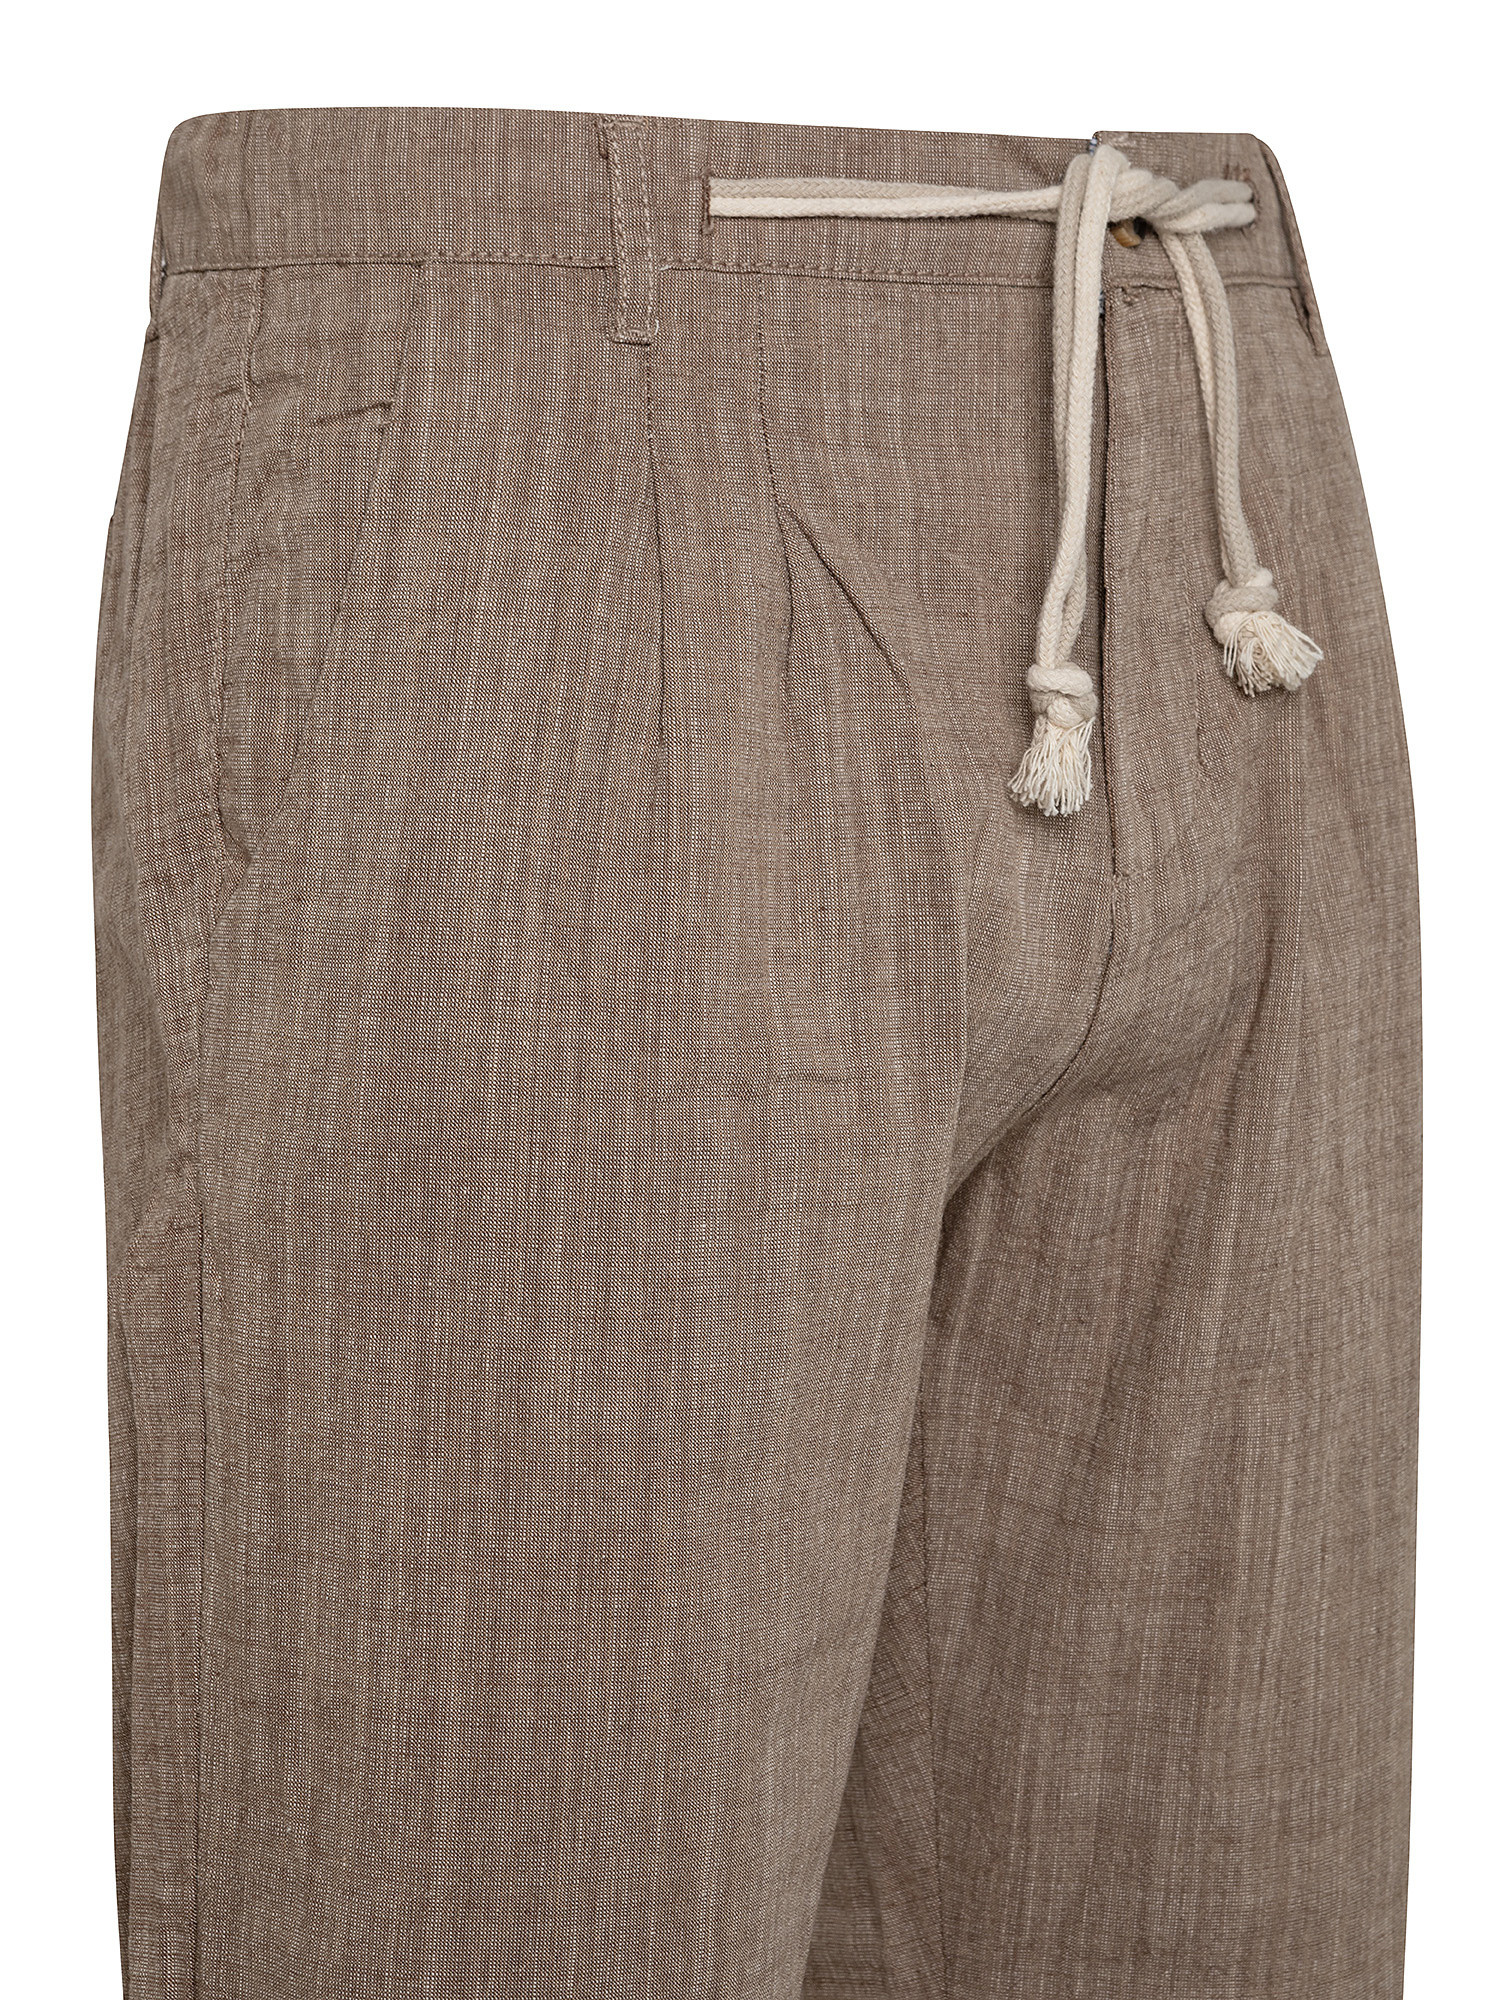 Pantalone con coulisse, Beige, large image number 2